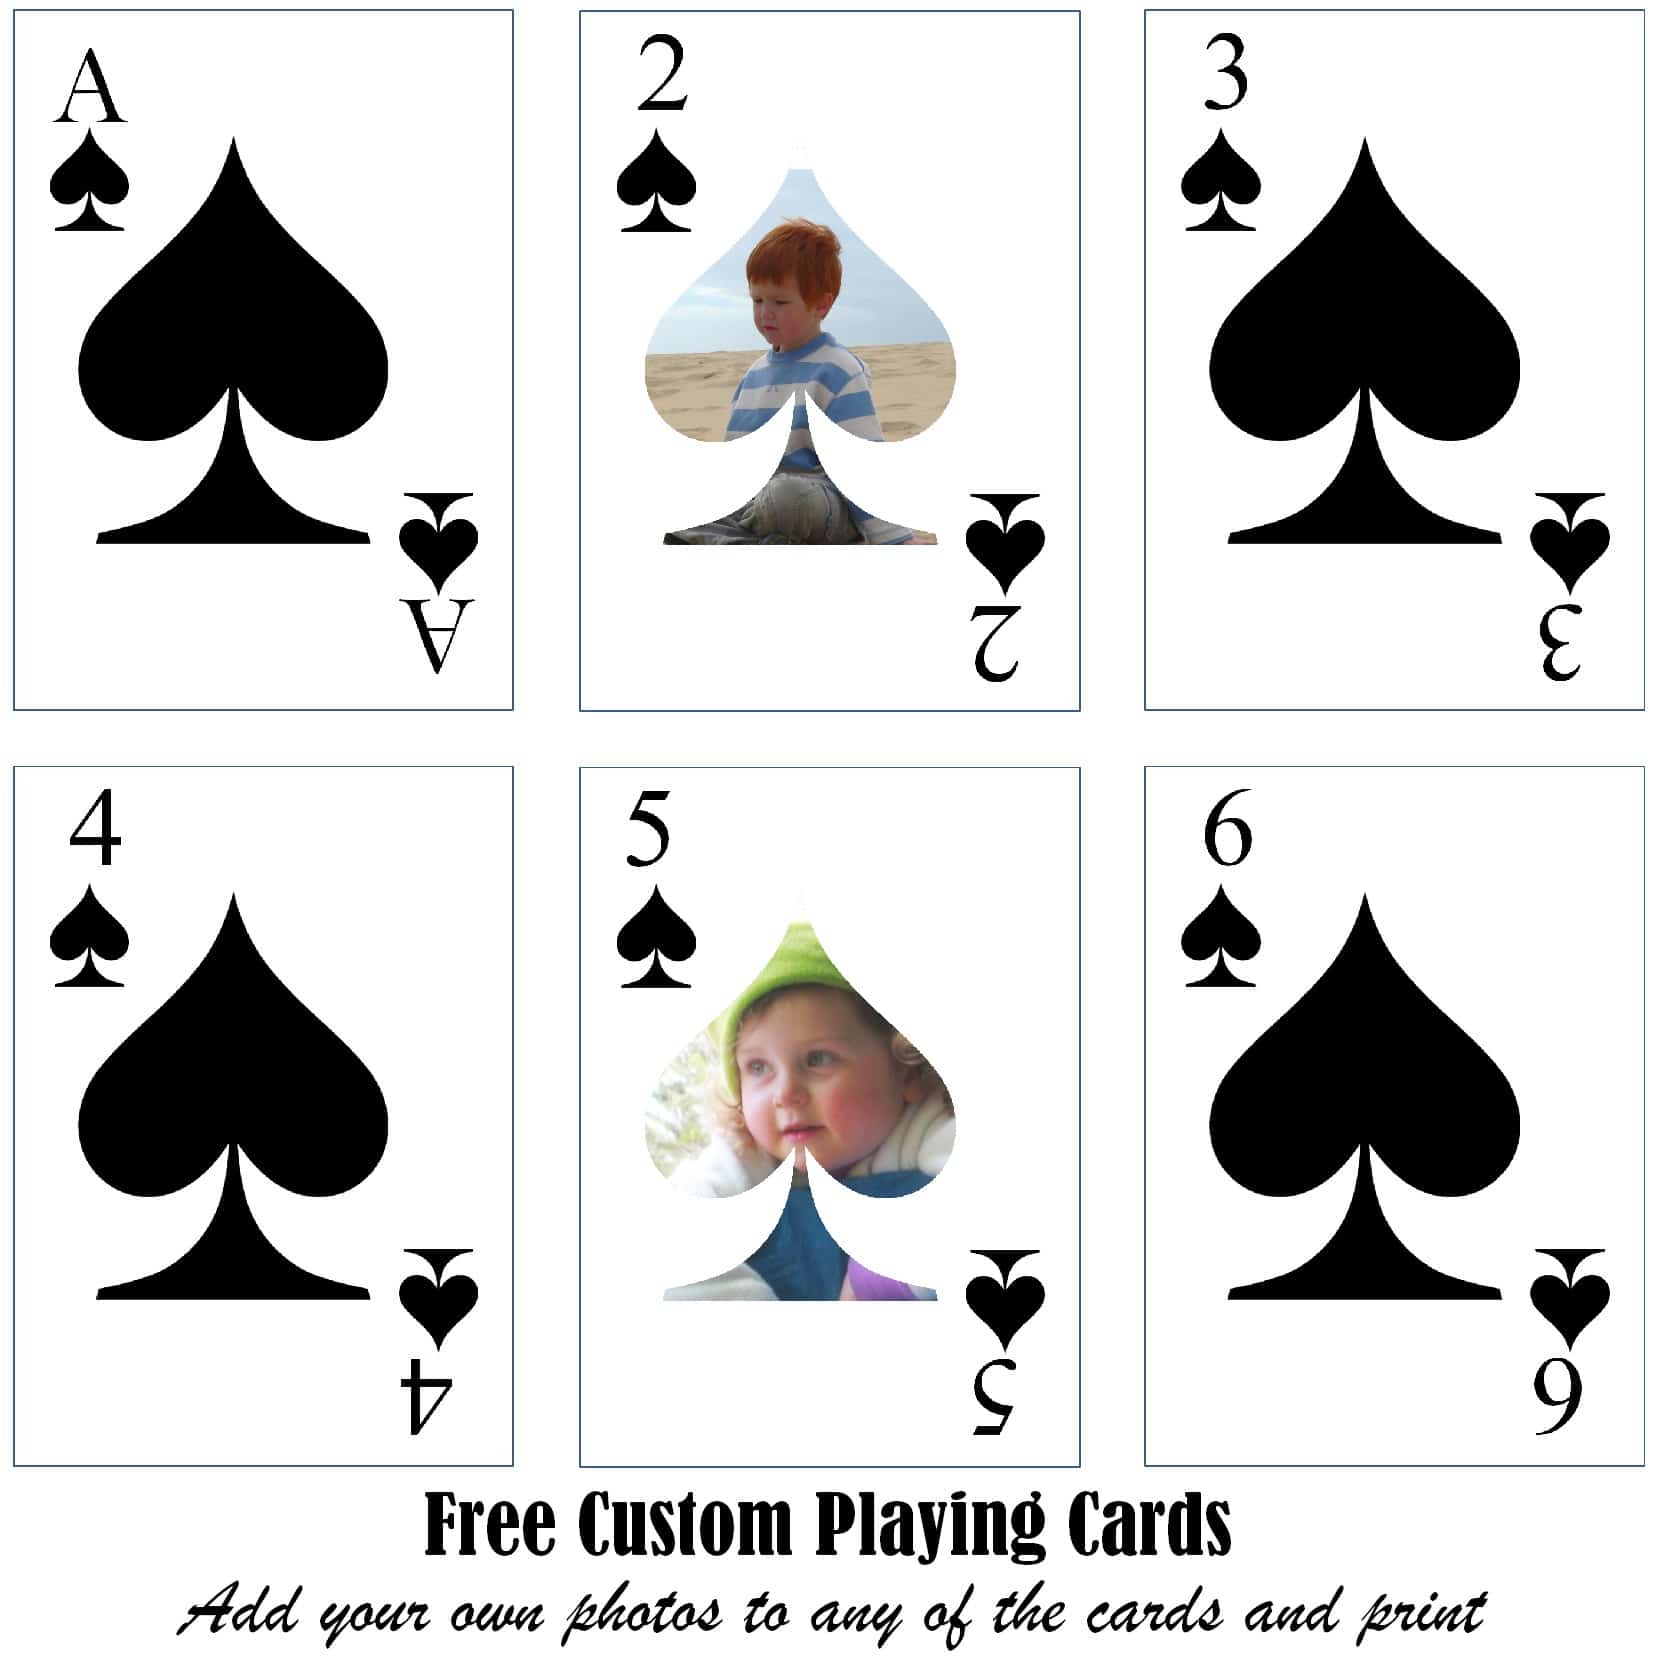 Free Printable Custom Playing Cards Add Your Photo and/or Text